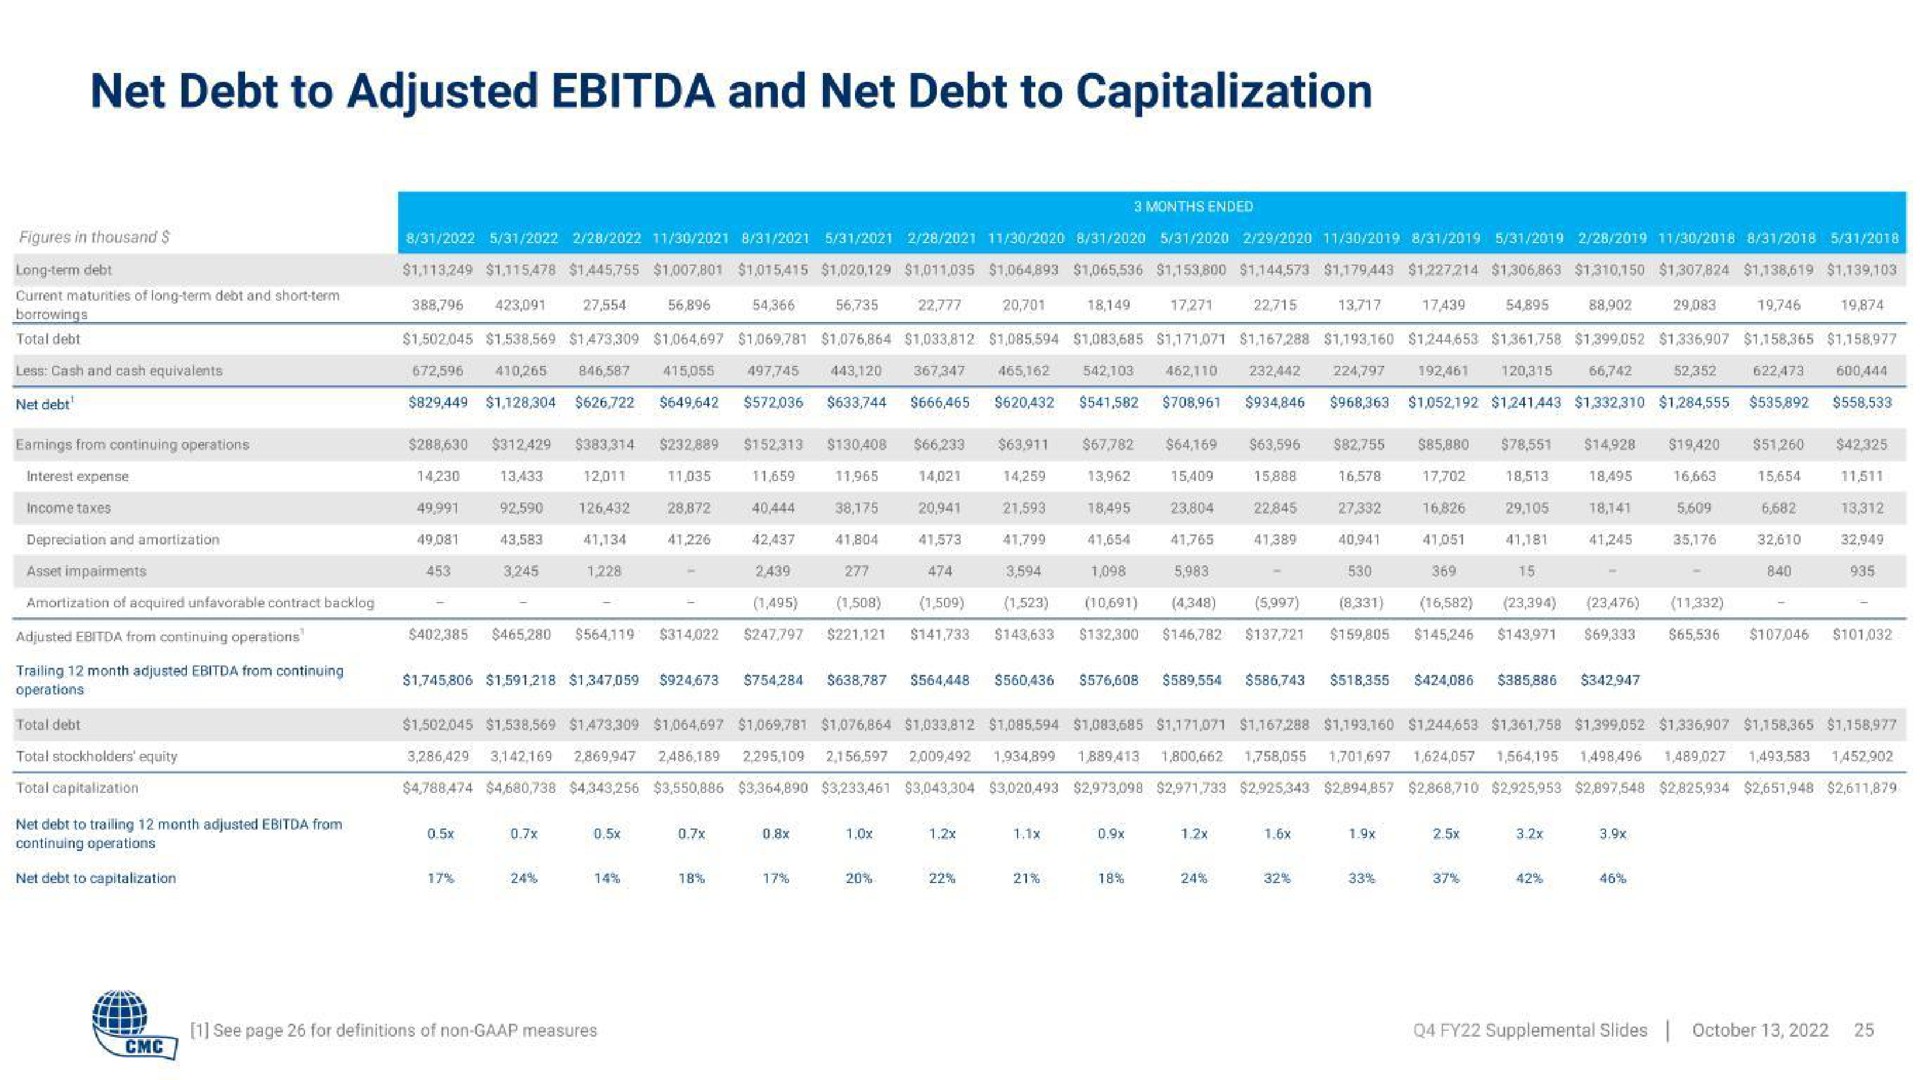 net debt to adjusted and net debt to capitalization | Commercial Metals Company